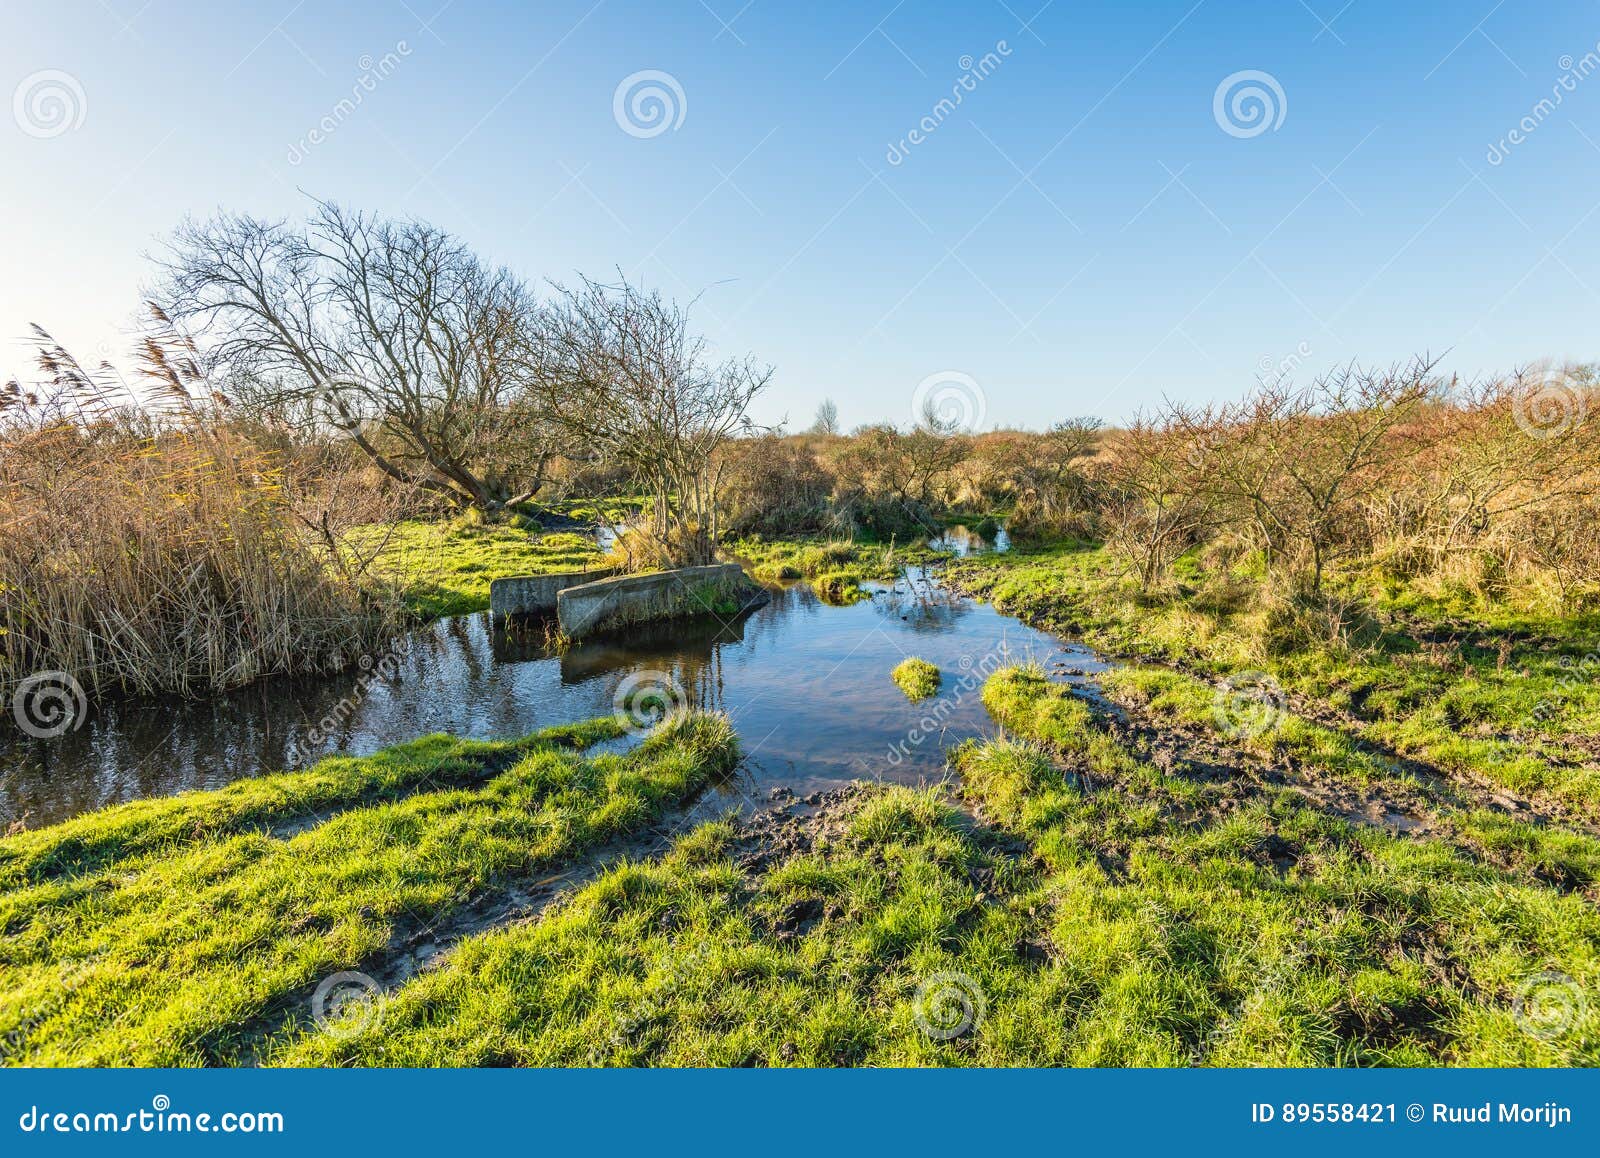 Strange Concrete Components in a Swampy Nature Reserve Stock Image